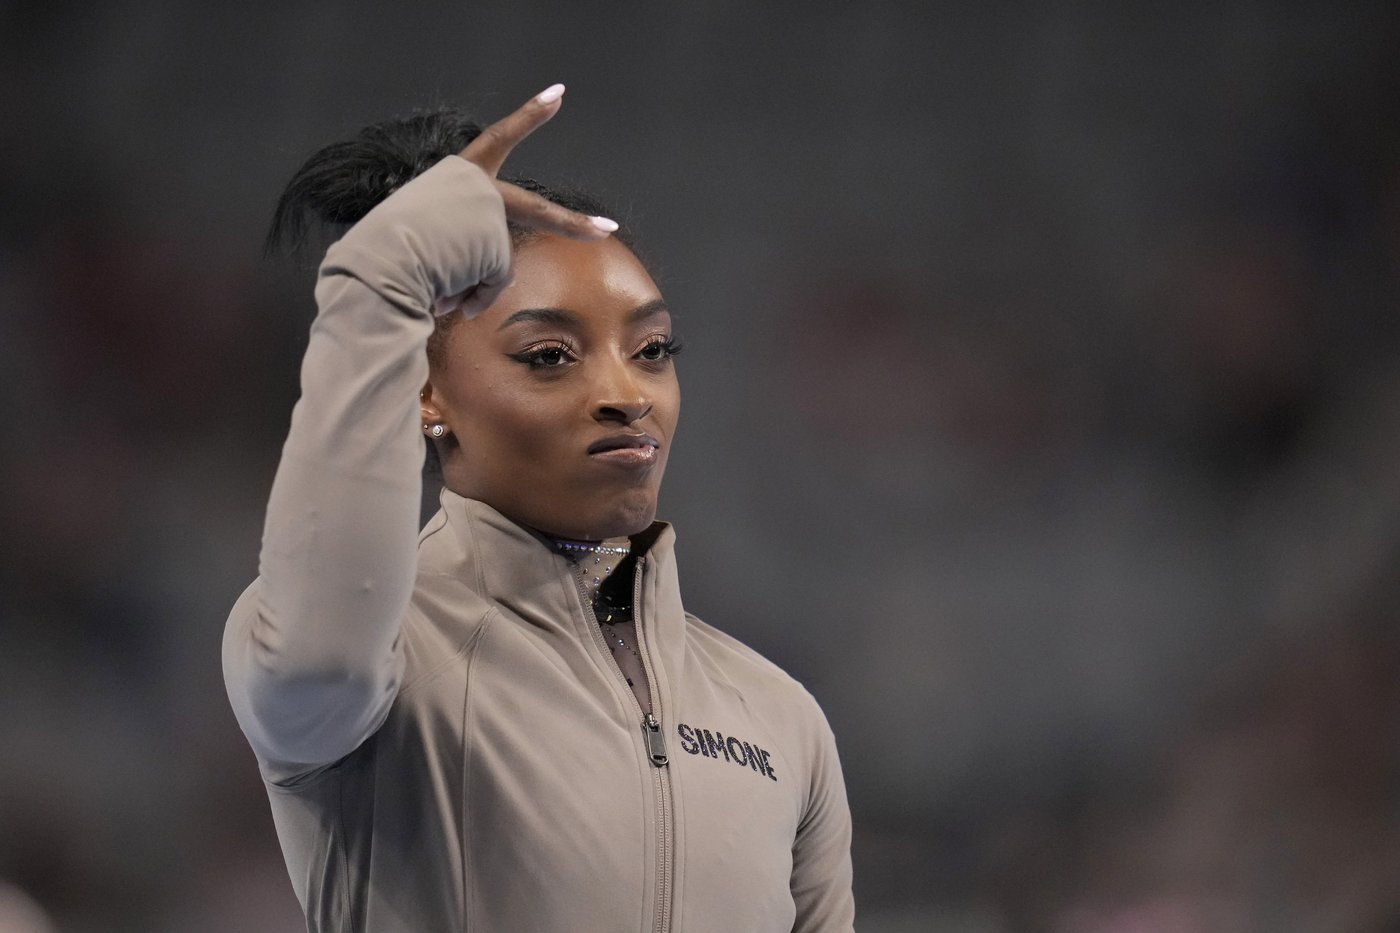 Simone Biles continues Olympic prep by cruising to her 9th U.S